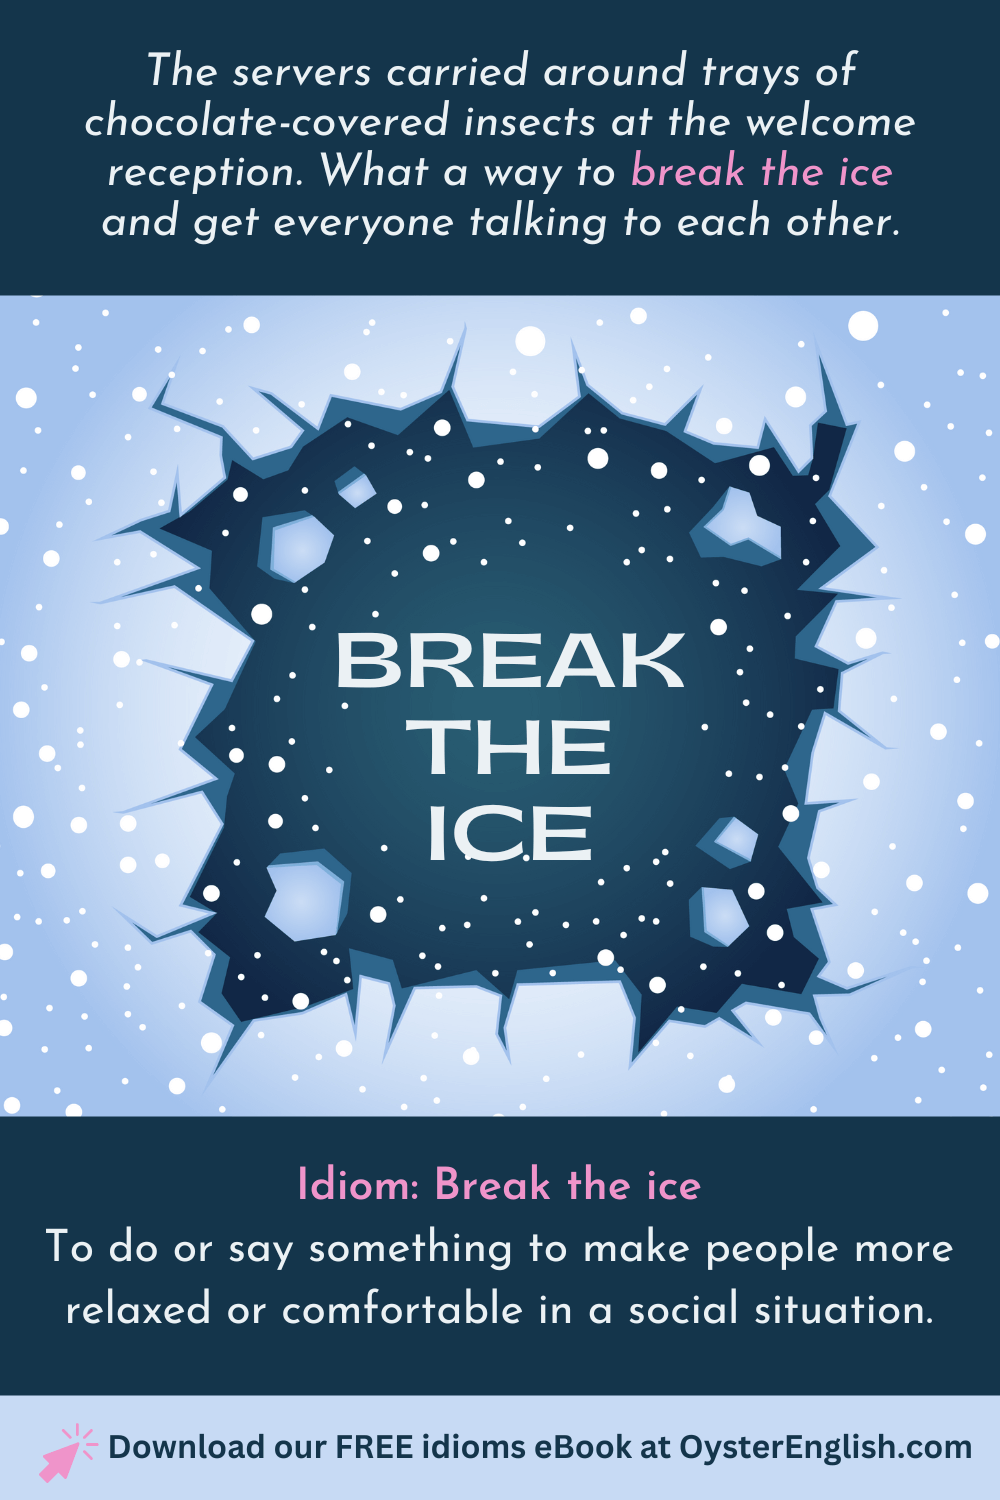 Break The Ice synonyms - 590 Words and Phrases for Break The Ice